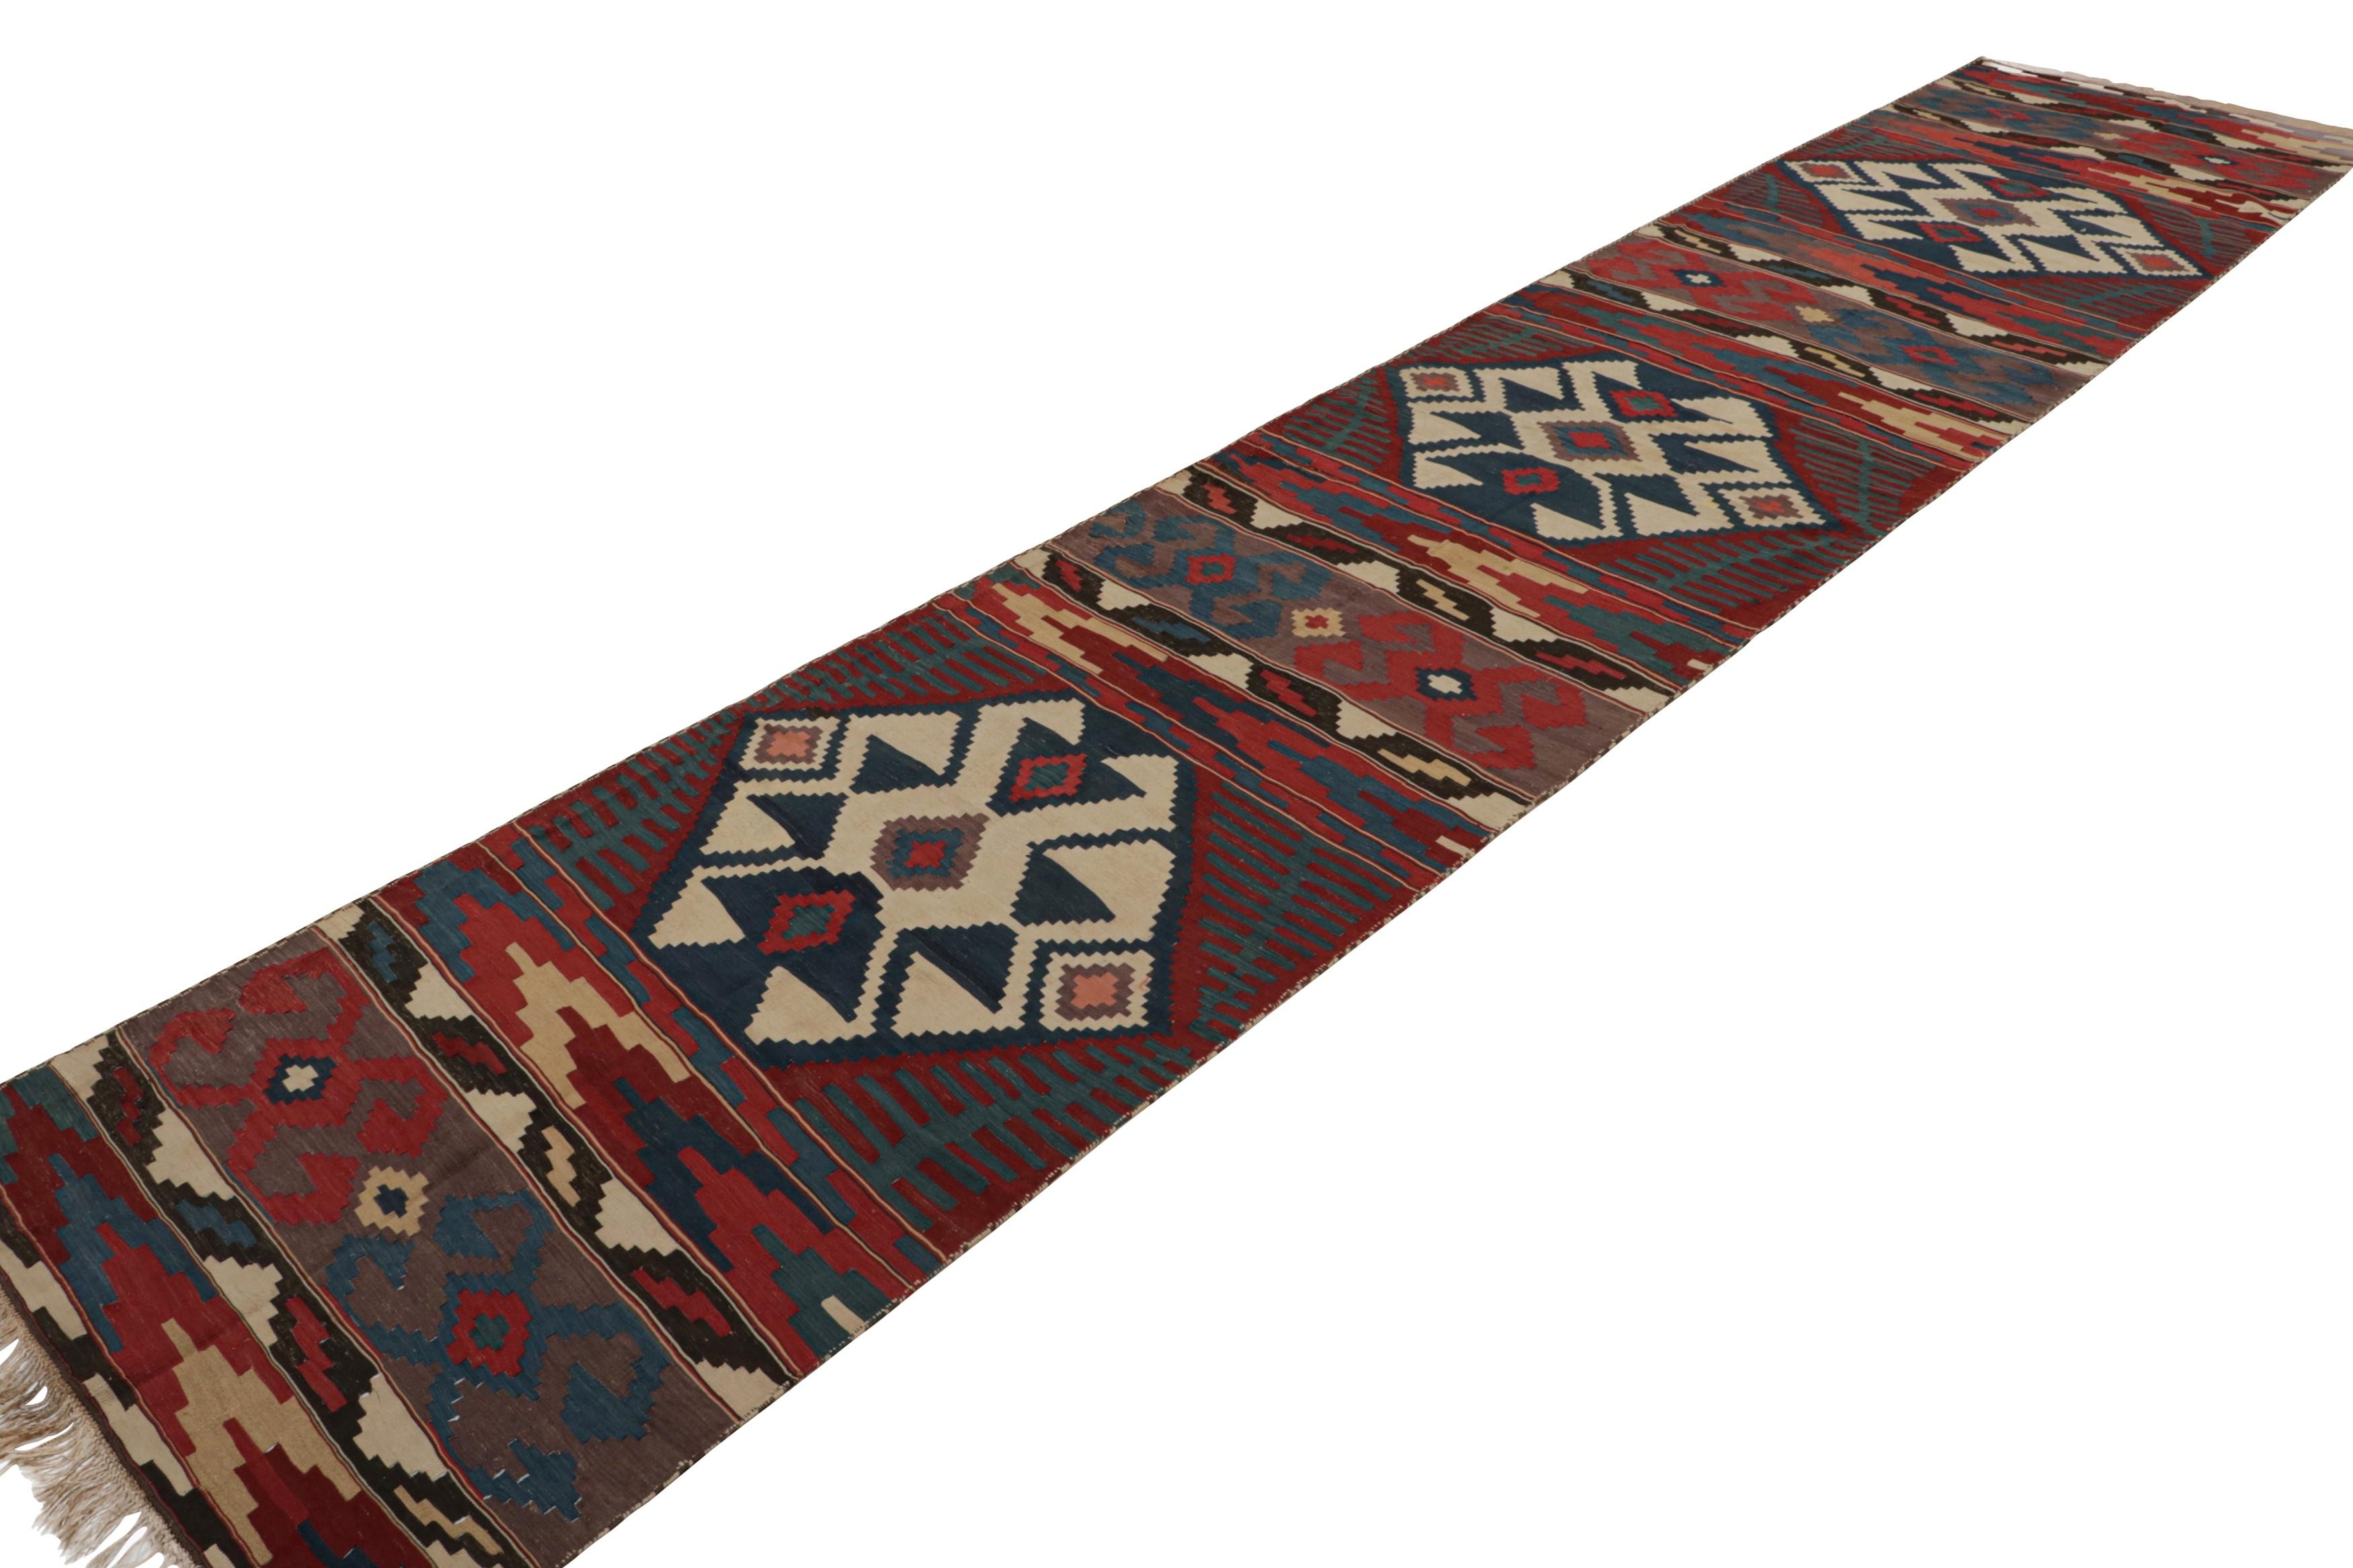 This flatweave is from a rare pair of twin 3x17 vintage Persian Kilim runner rugs, hand-knotted in wool circa 1950-1960. These tribal runners are nearly identical in size and design, with geometric patterns in red, blue and beige tones. 

On the